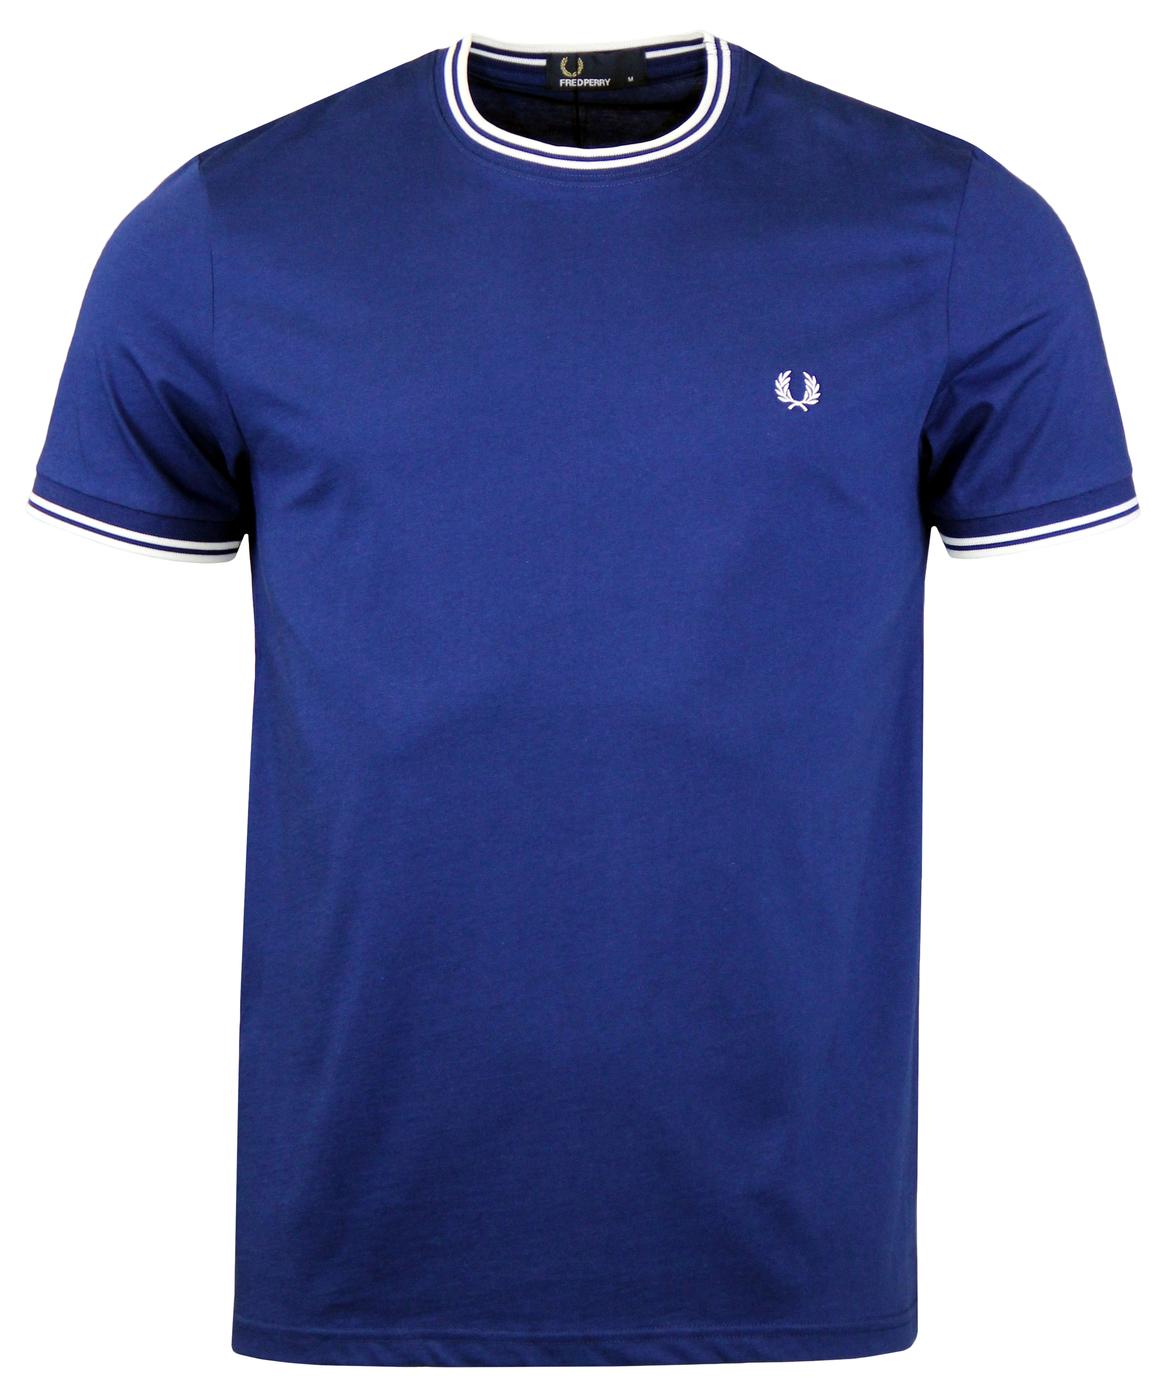 FRED PERRY Retro Mod Twin Tipped Crew Tee Med. Blue